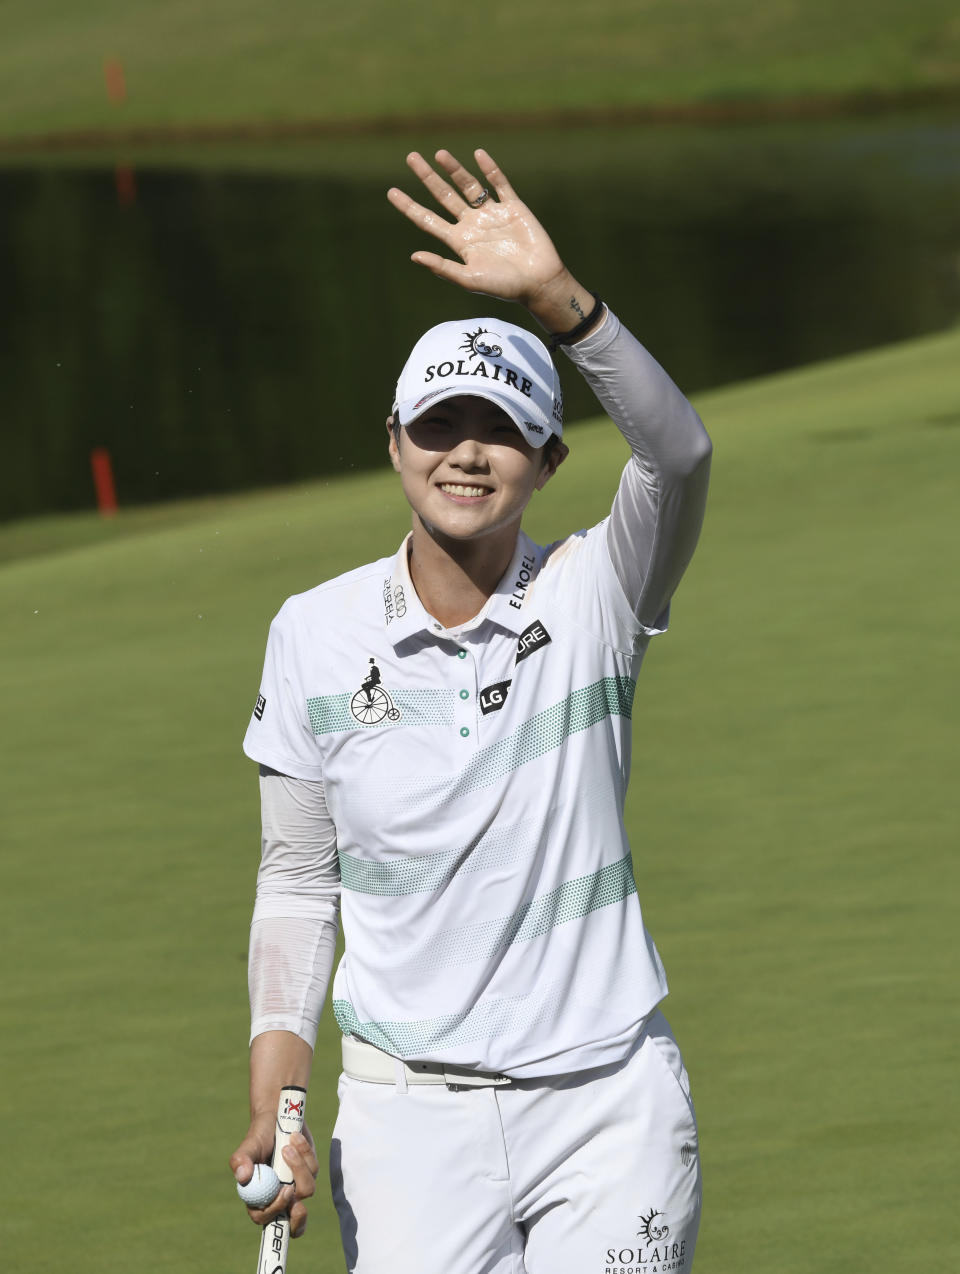 Sung Hyun Park waves to fans after sinking her final putt to win the LPGA Walmart NW Arkansas Championship golf tournament, Sunday, June 30, 2019, in Rogers, Ark. (AP Photo/Michael Woods)